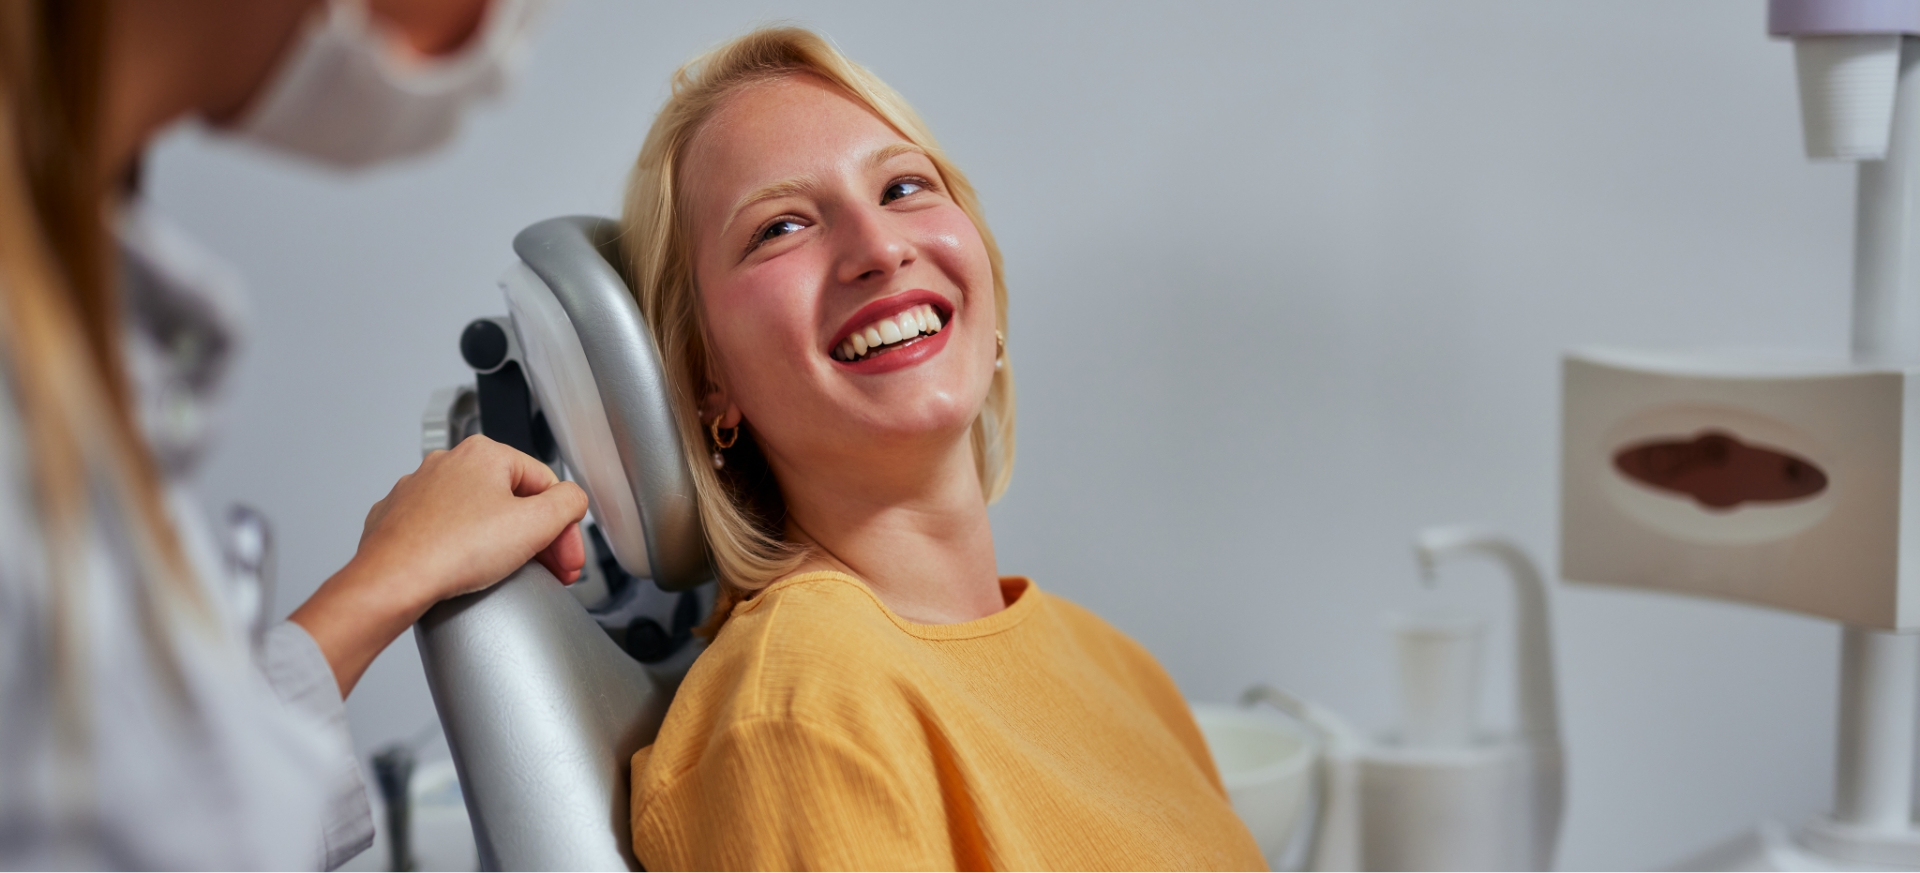 Blonde woman in yellow sweater smiling at her dentist